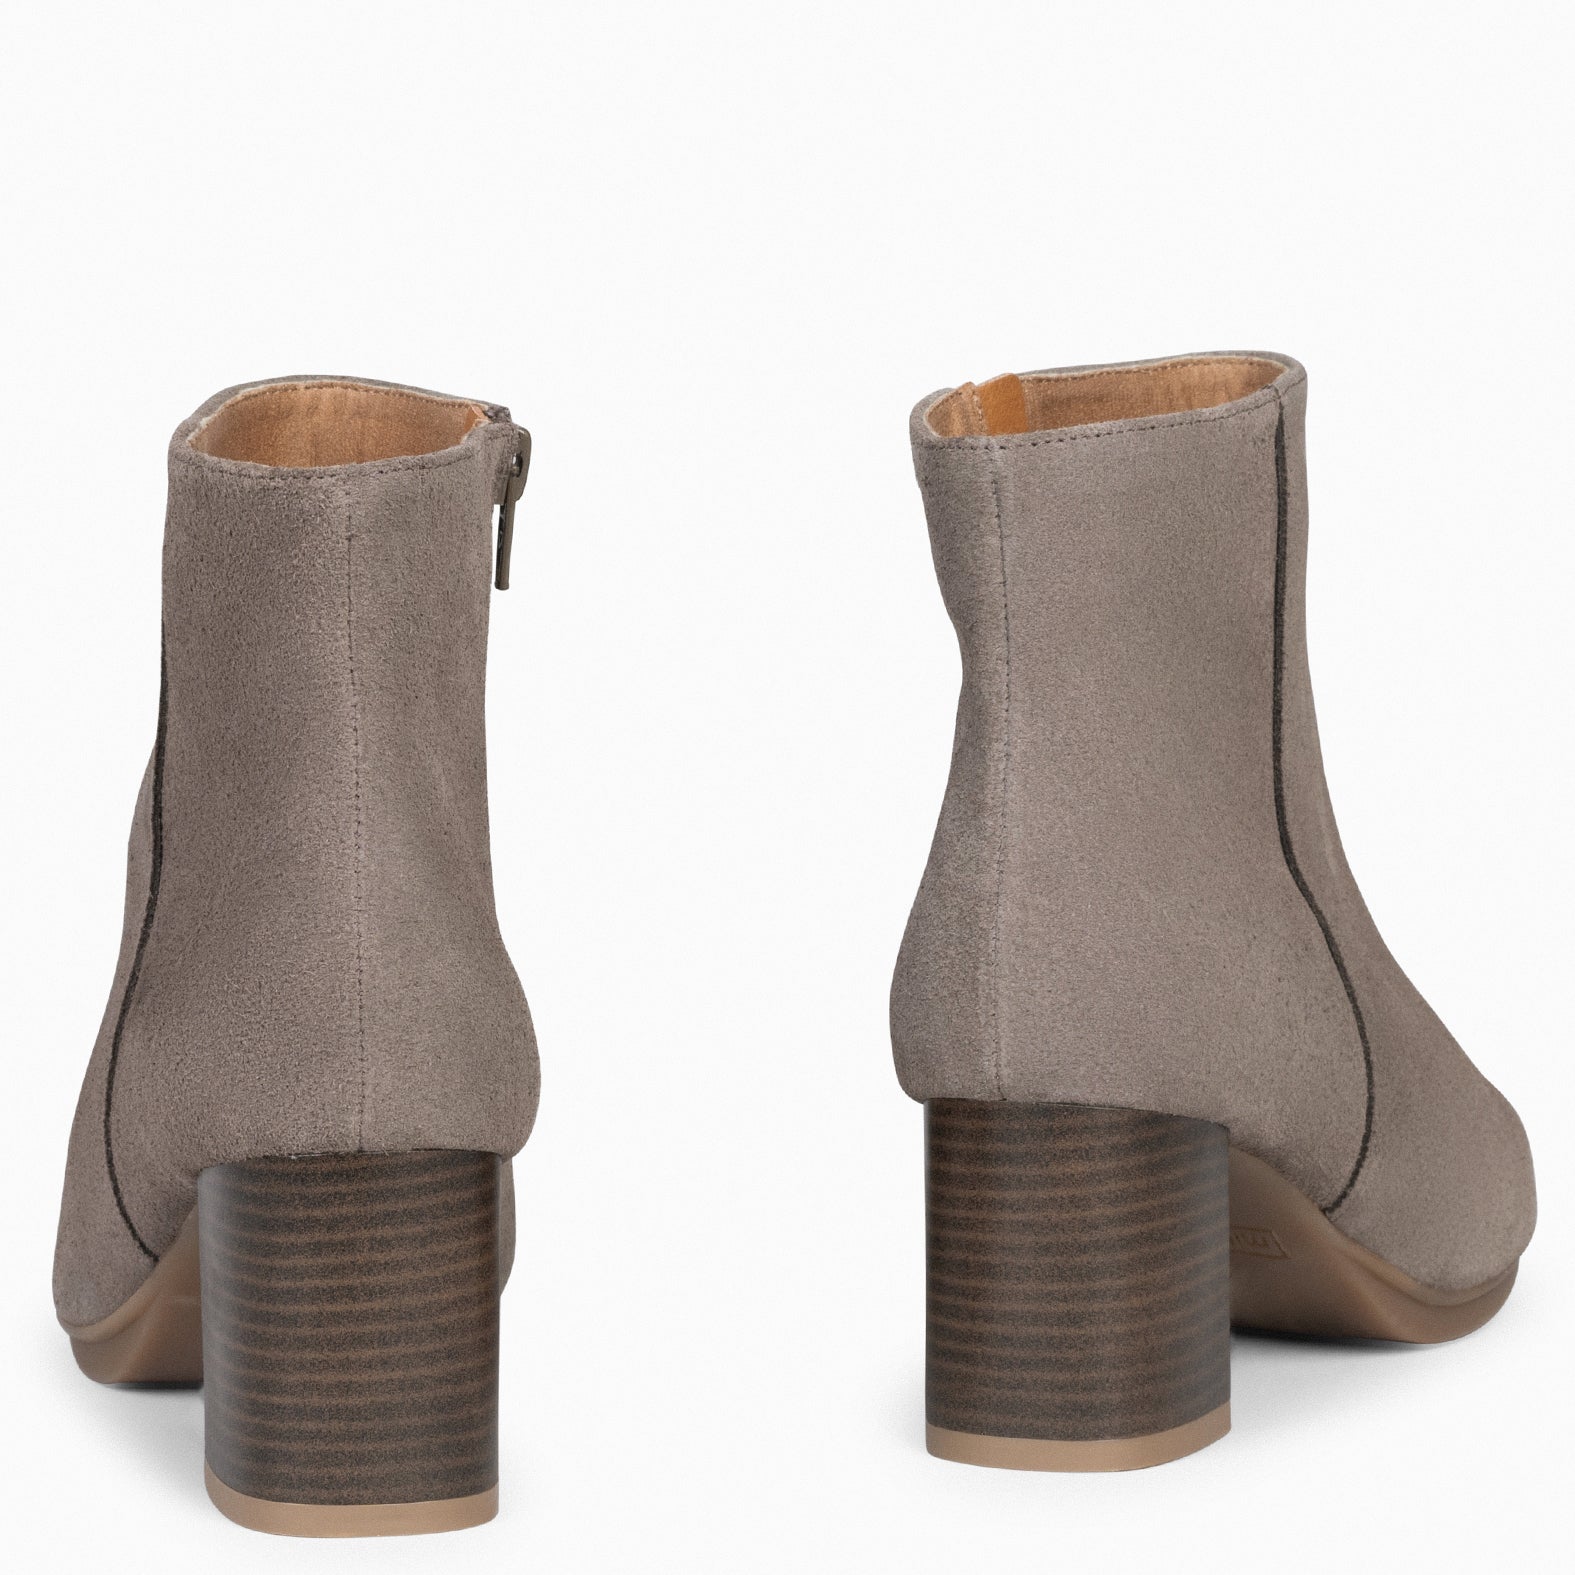 CITY - TAUPE suede leather wide heel ankle boots 